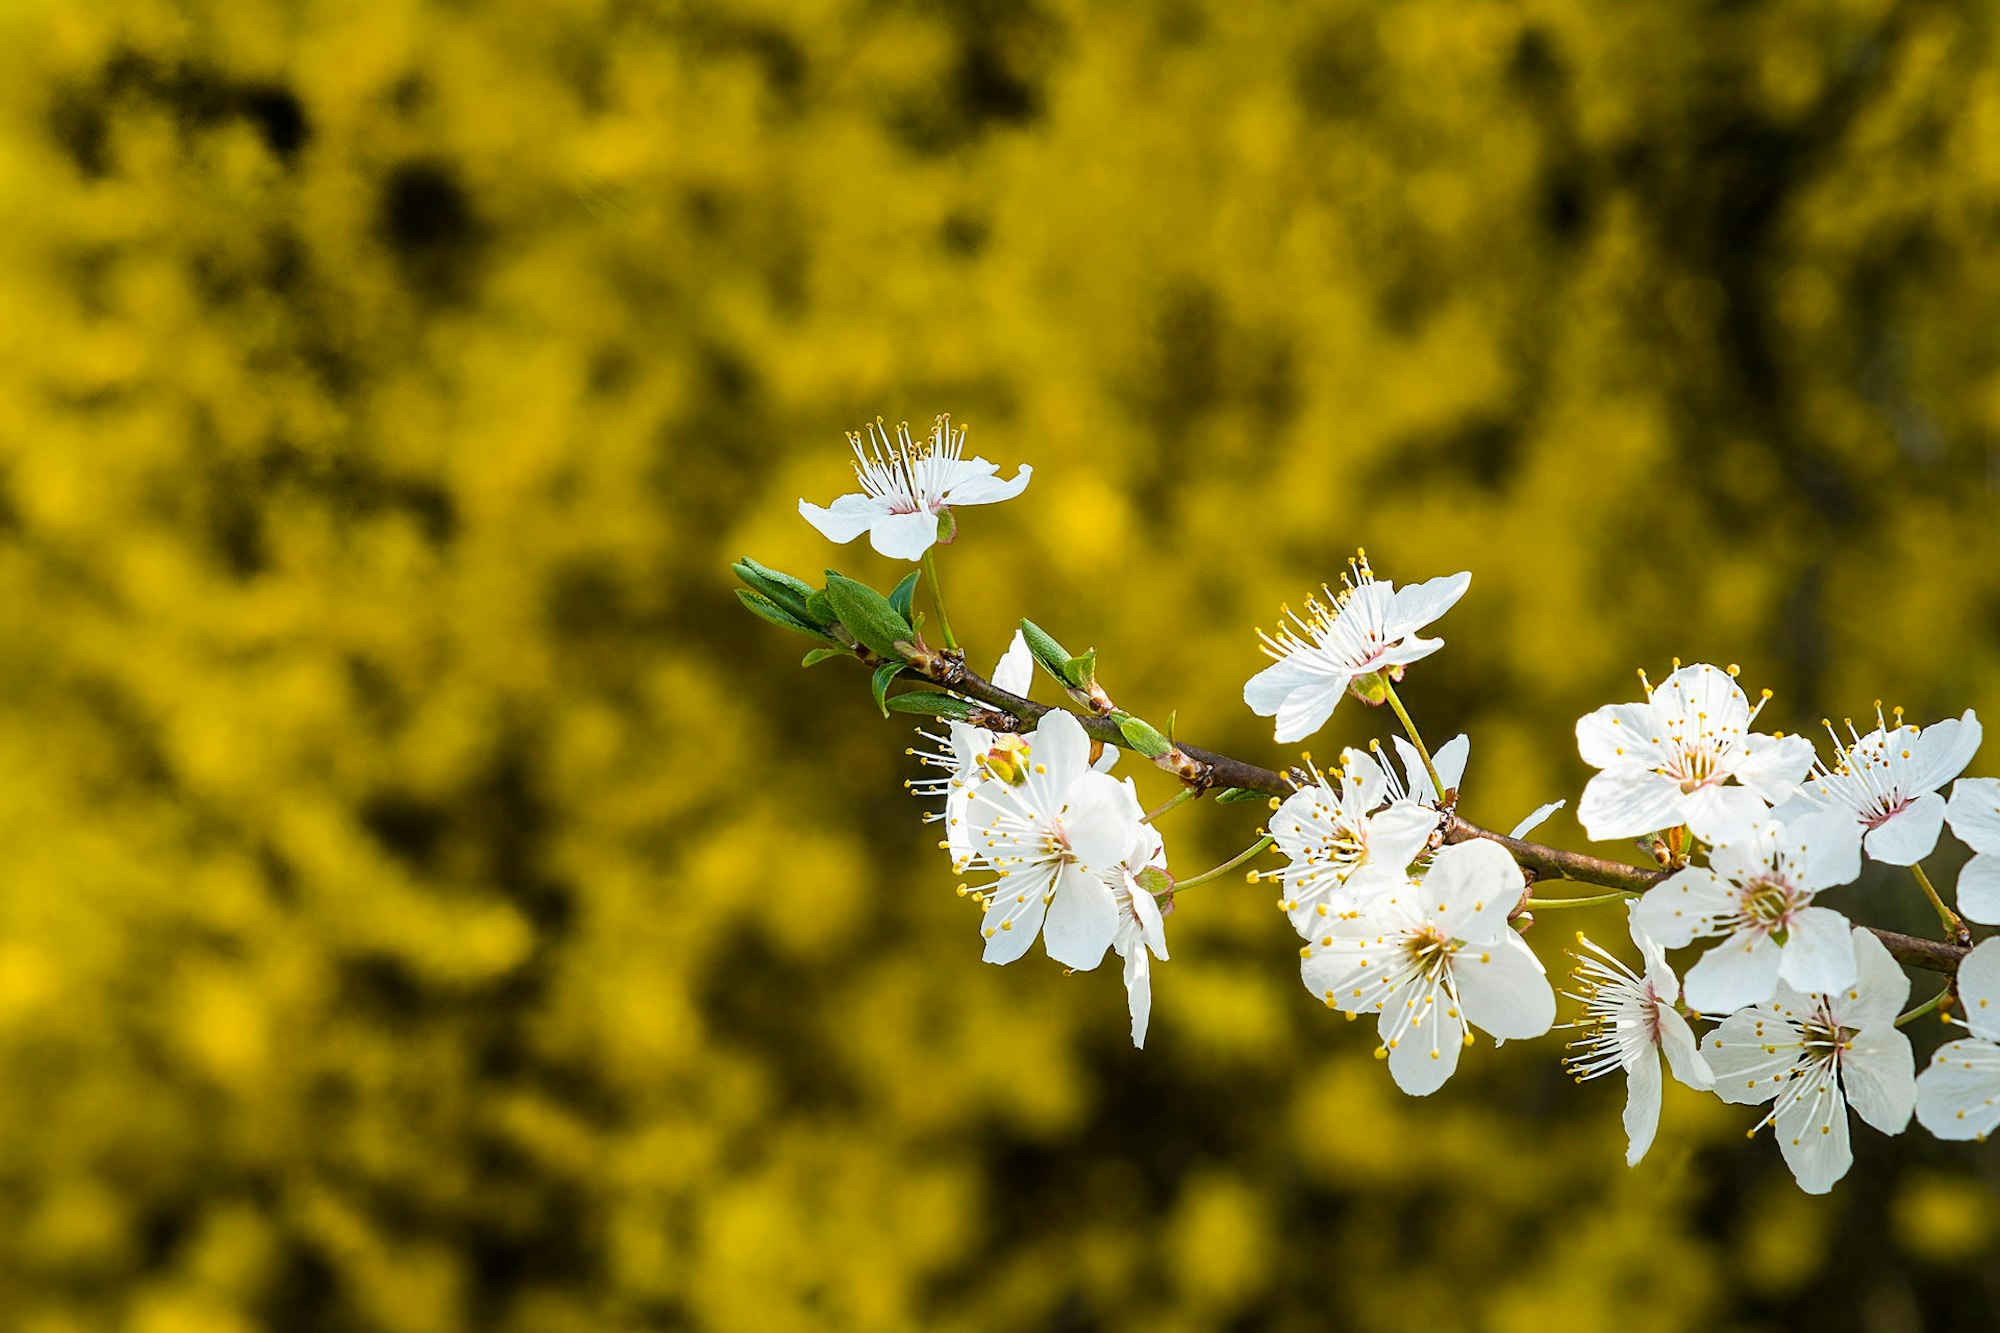 GettyImages-517009594-Amelanchier laevis - sergioph